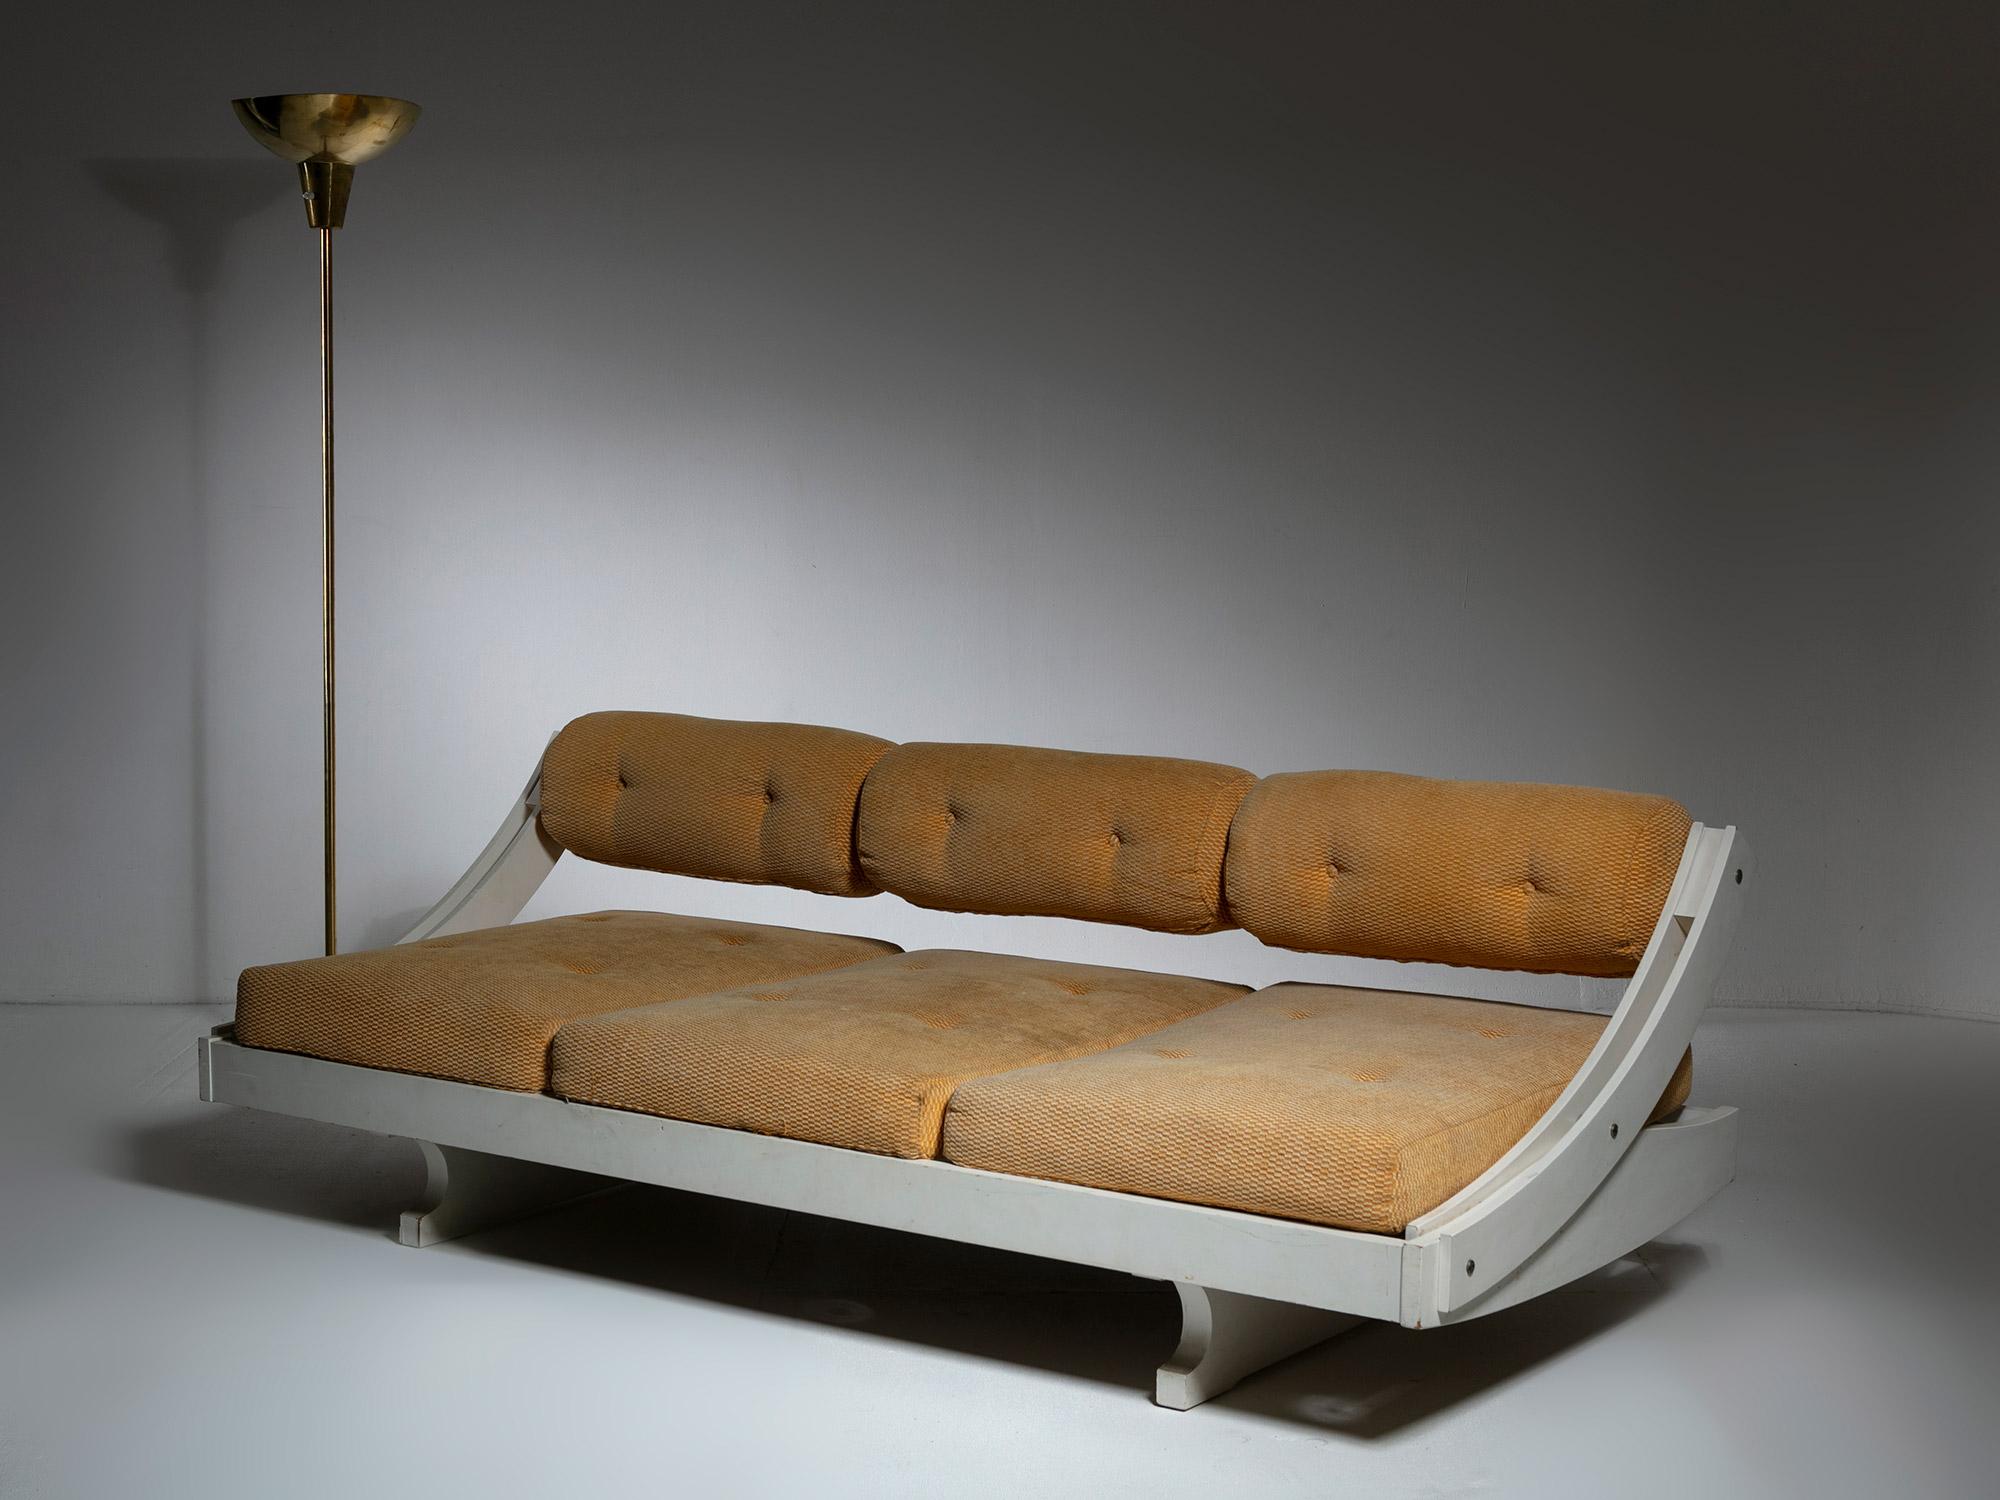 Adjustable White Wood Daybed By Gianni Songia for Sormani, Italy, 1960s For Sale 3